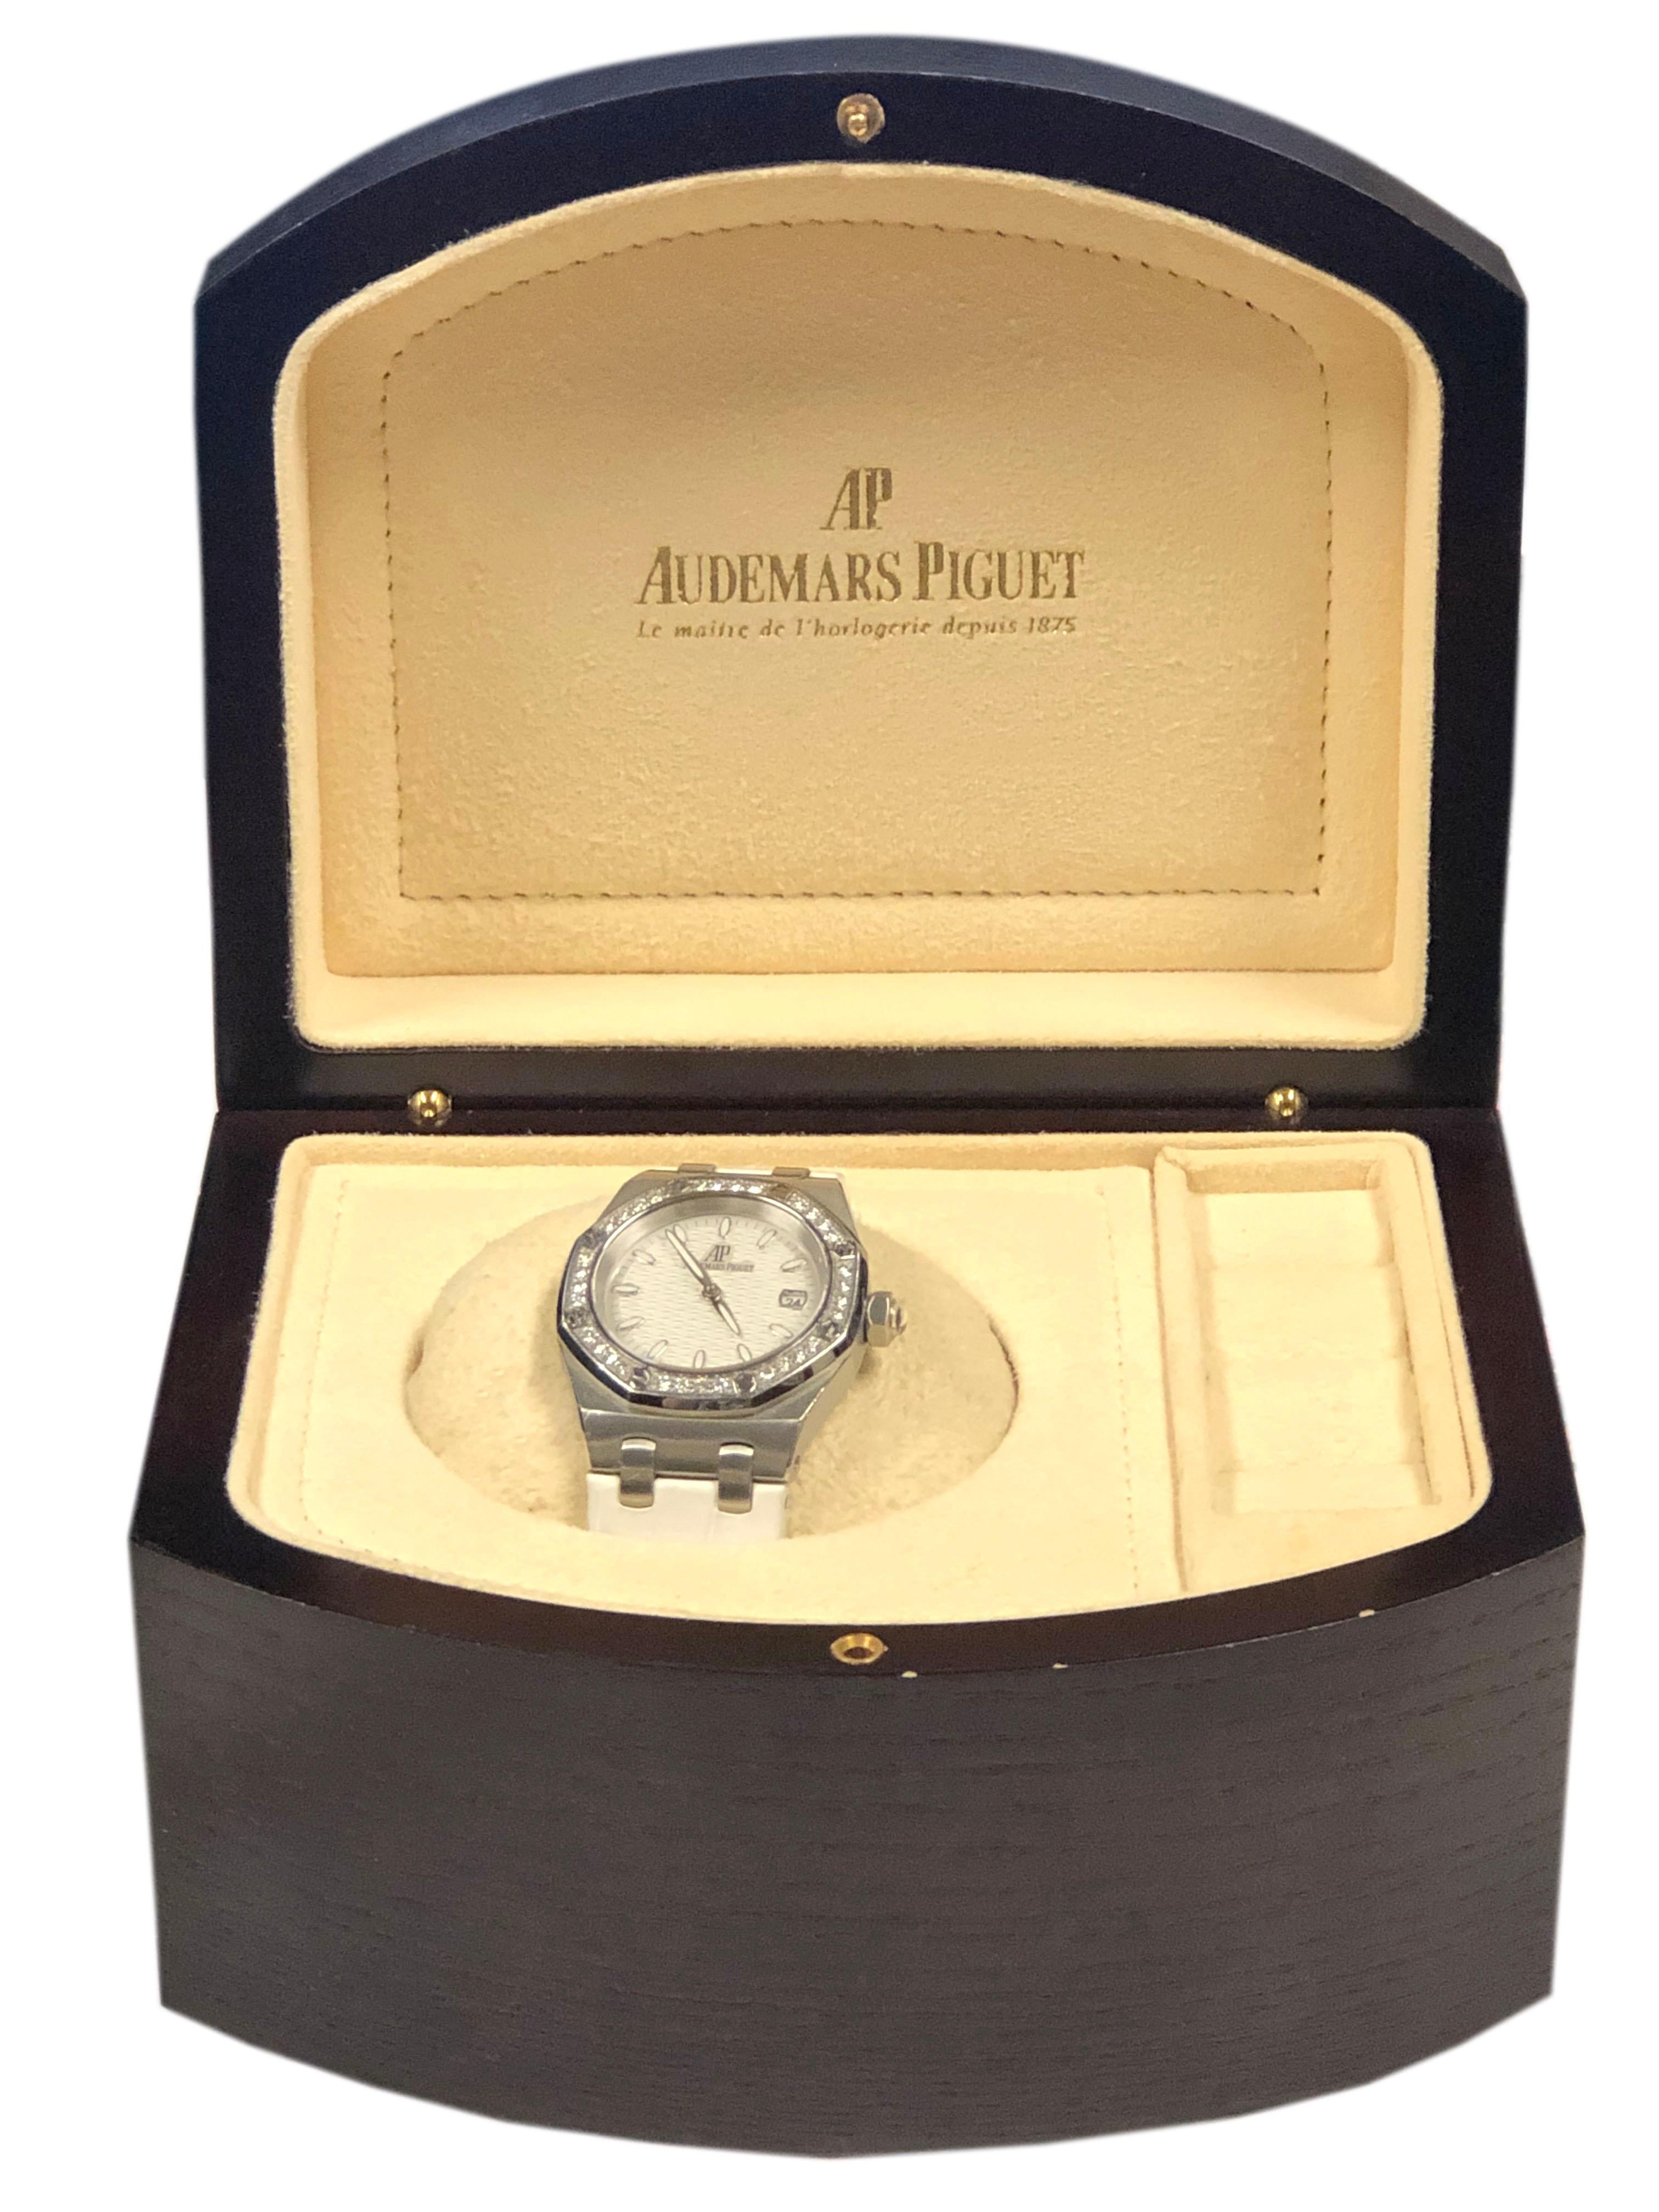 Audemars Piguet Royal Oak Ladies Steel and Diamonds Wrist Watch Ref 6760 In Excellent Condition For Sale In Chicago, IL